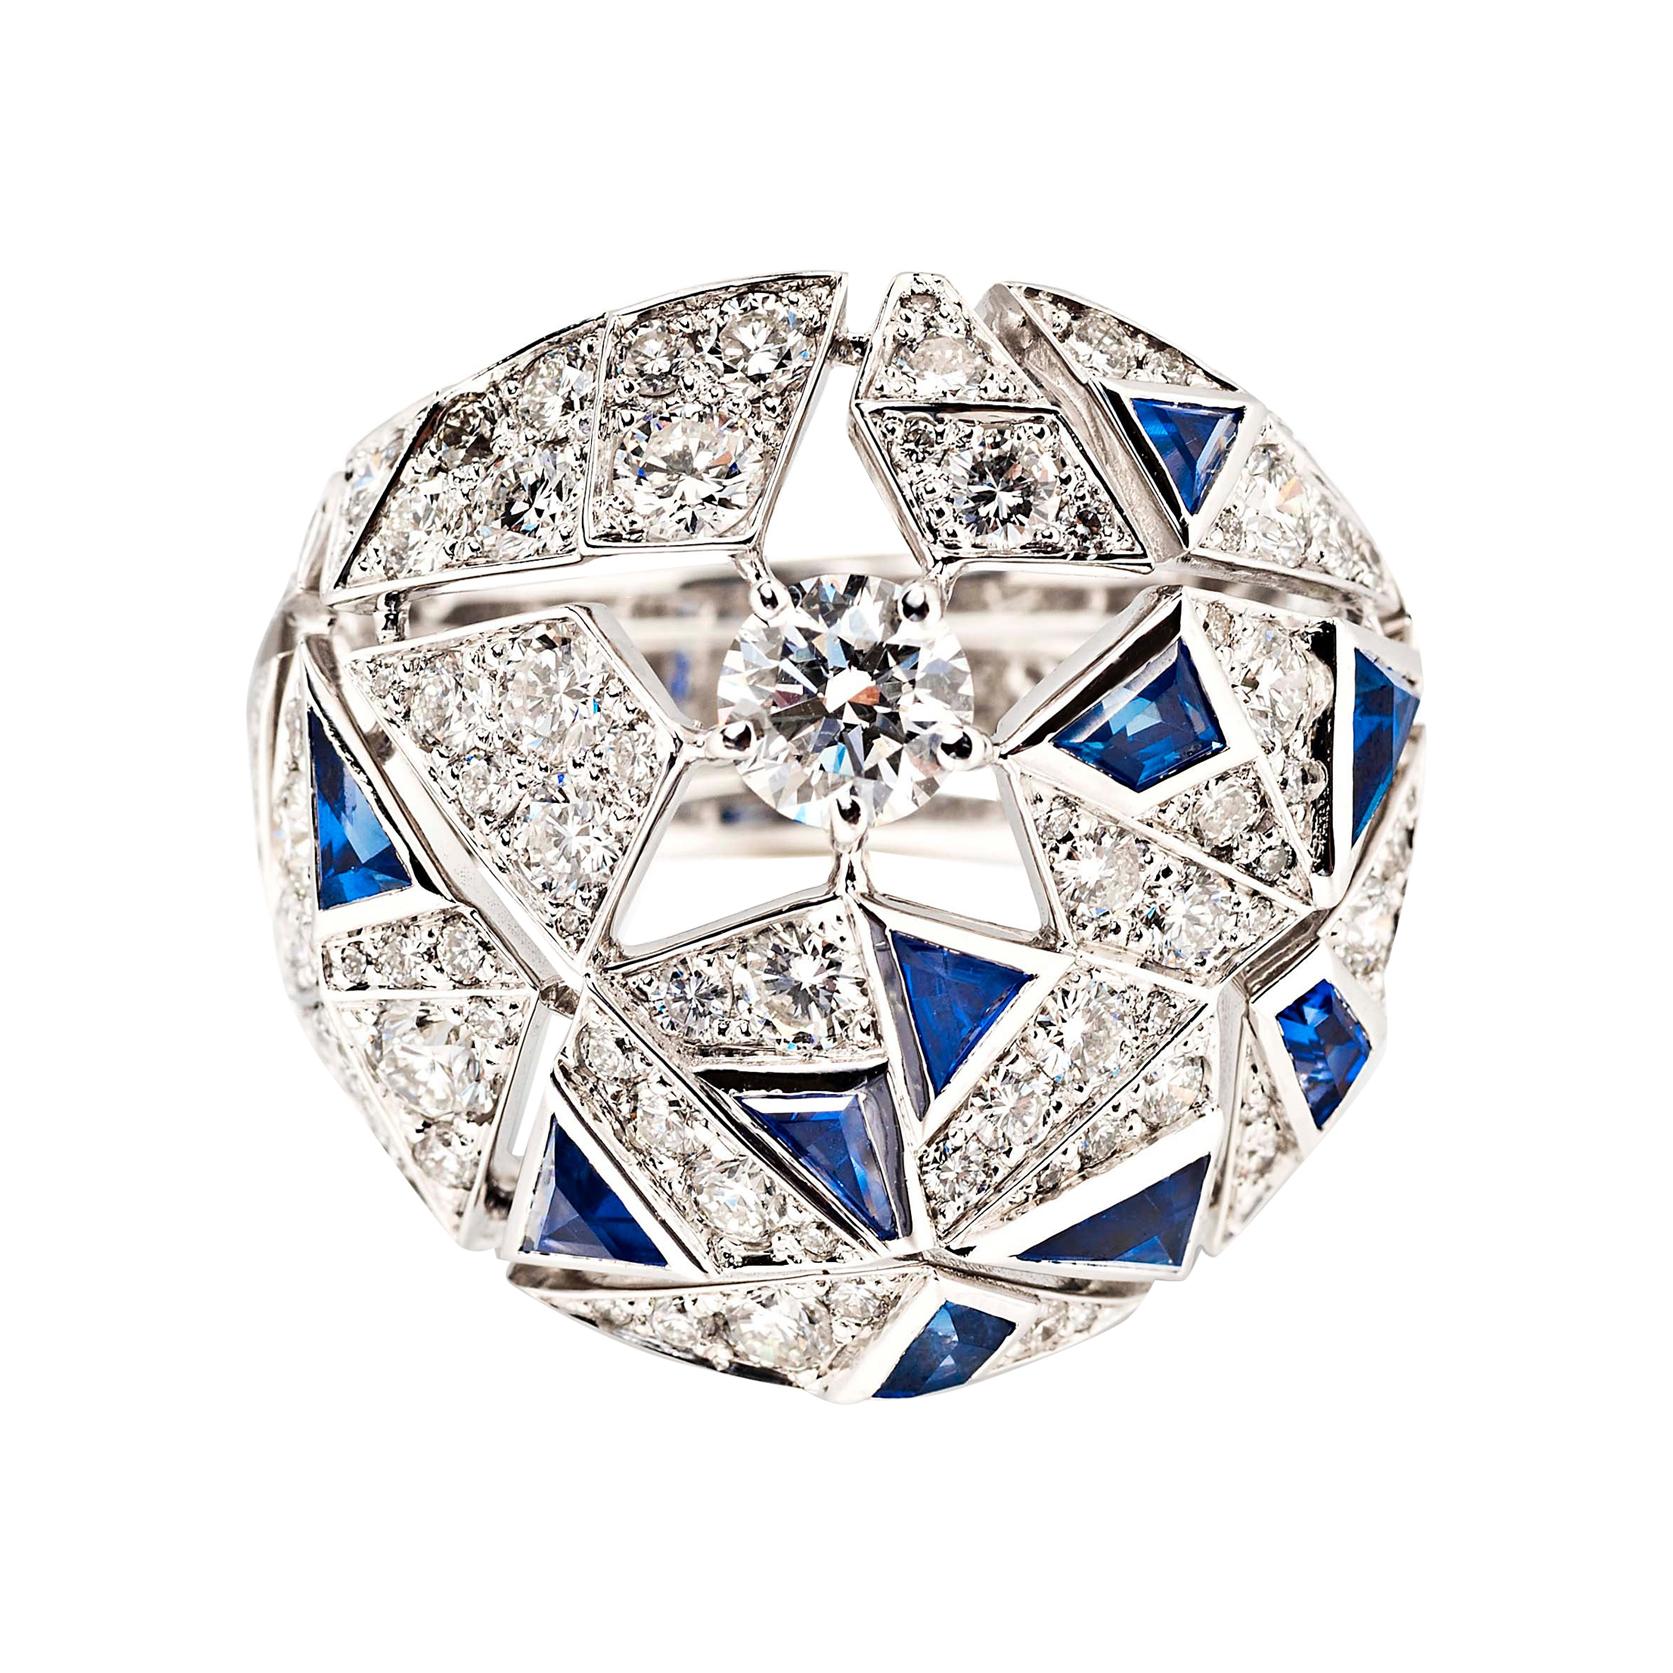 Inspired by the 1920s and the glittering habitués of Parisian nightlife, Chanel blends Art Deco elegance with all out glamour in this one-of-a-kind diamond and sapphire cocktail ring. A central diamond is surrounded by negative space that forms an